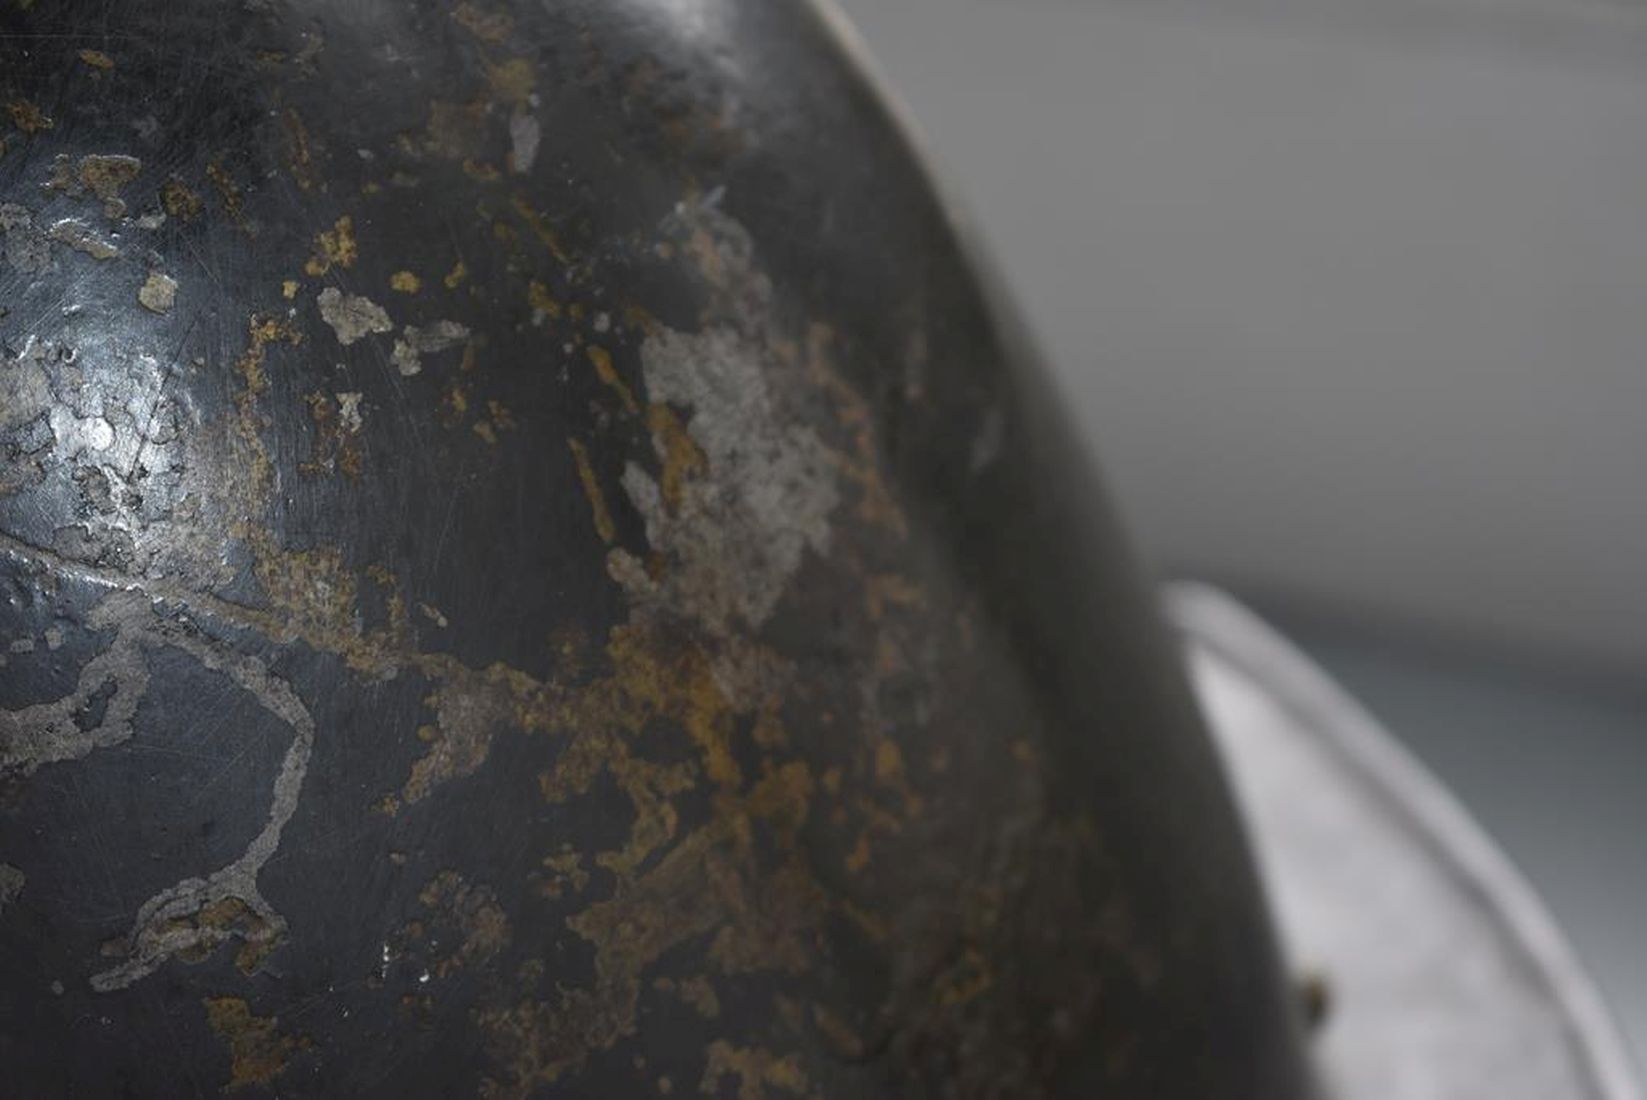 A GOOD 17TH CENTURY DUTCH OR NORTH EUROPEAN PIKEMAN'S POT OR HELMET, the two-piece skull drawn out - Image 18 of 19